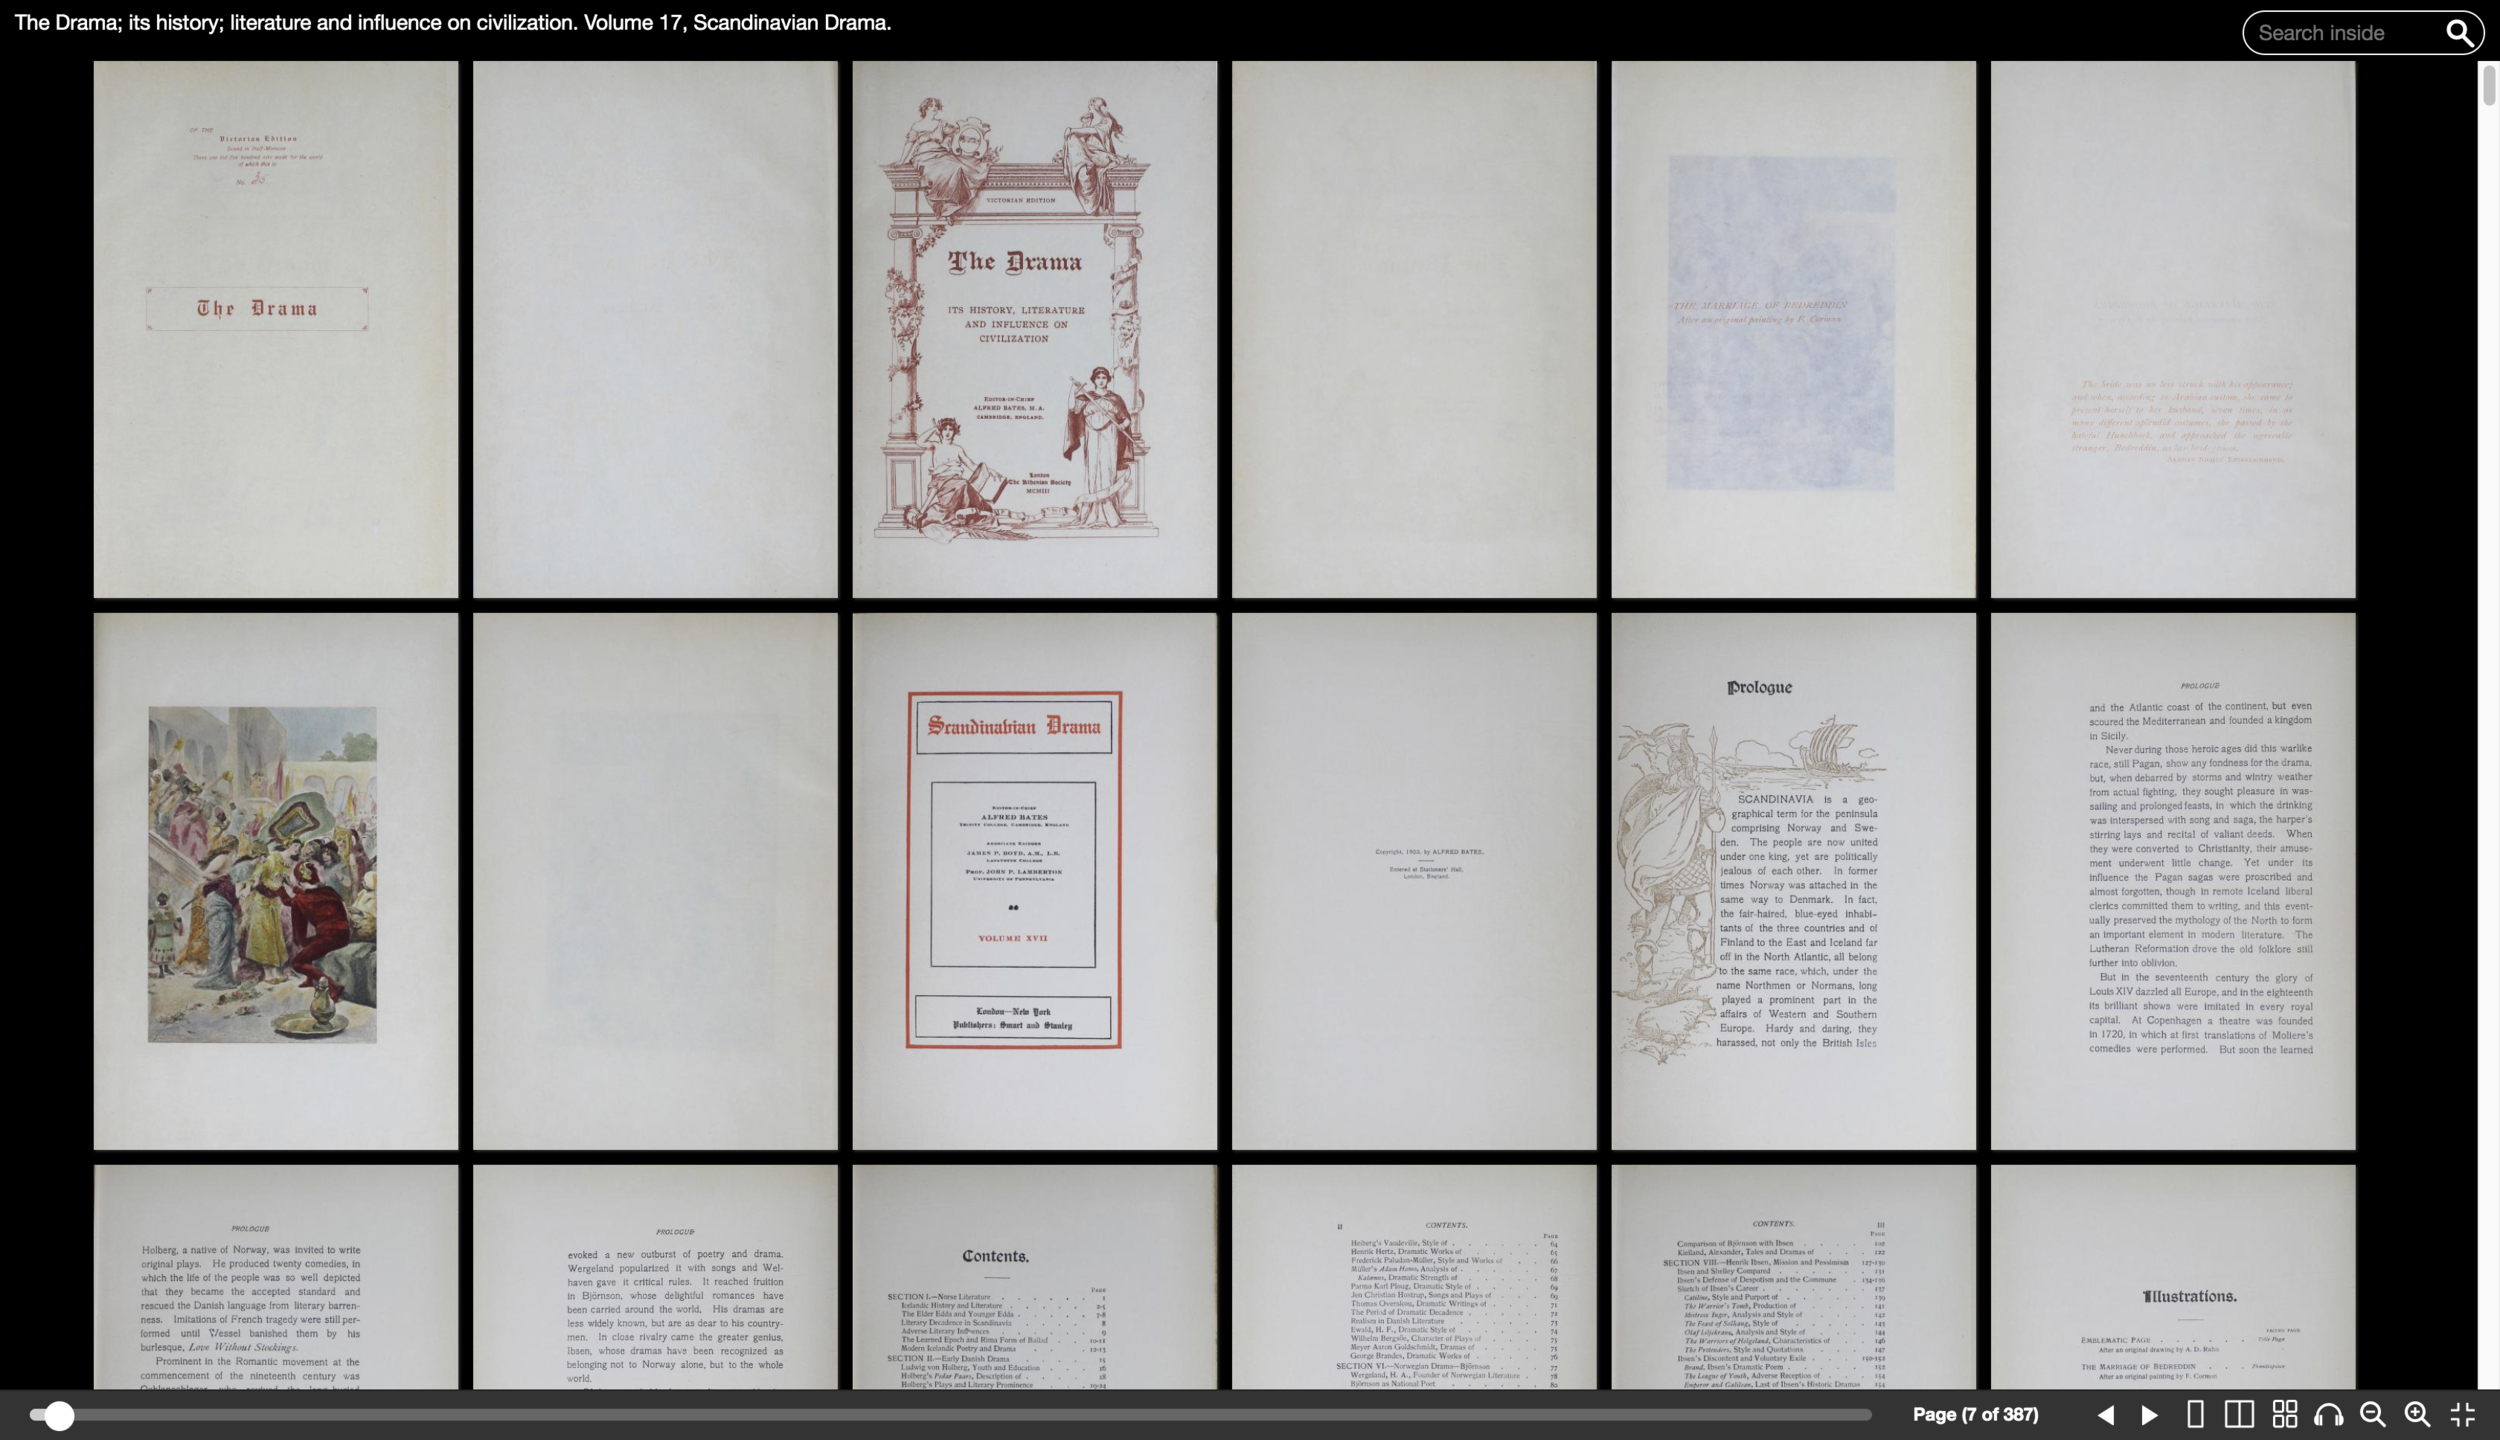   Grid view of the    e-book in the Internet Archive   .  